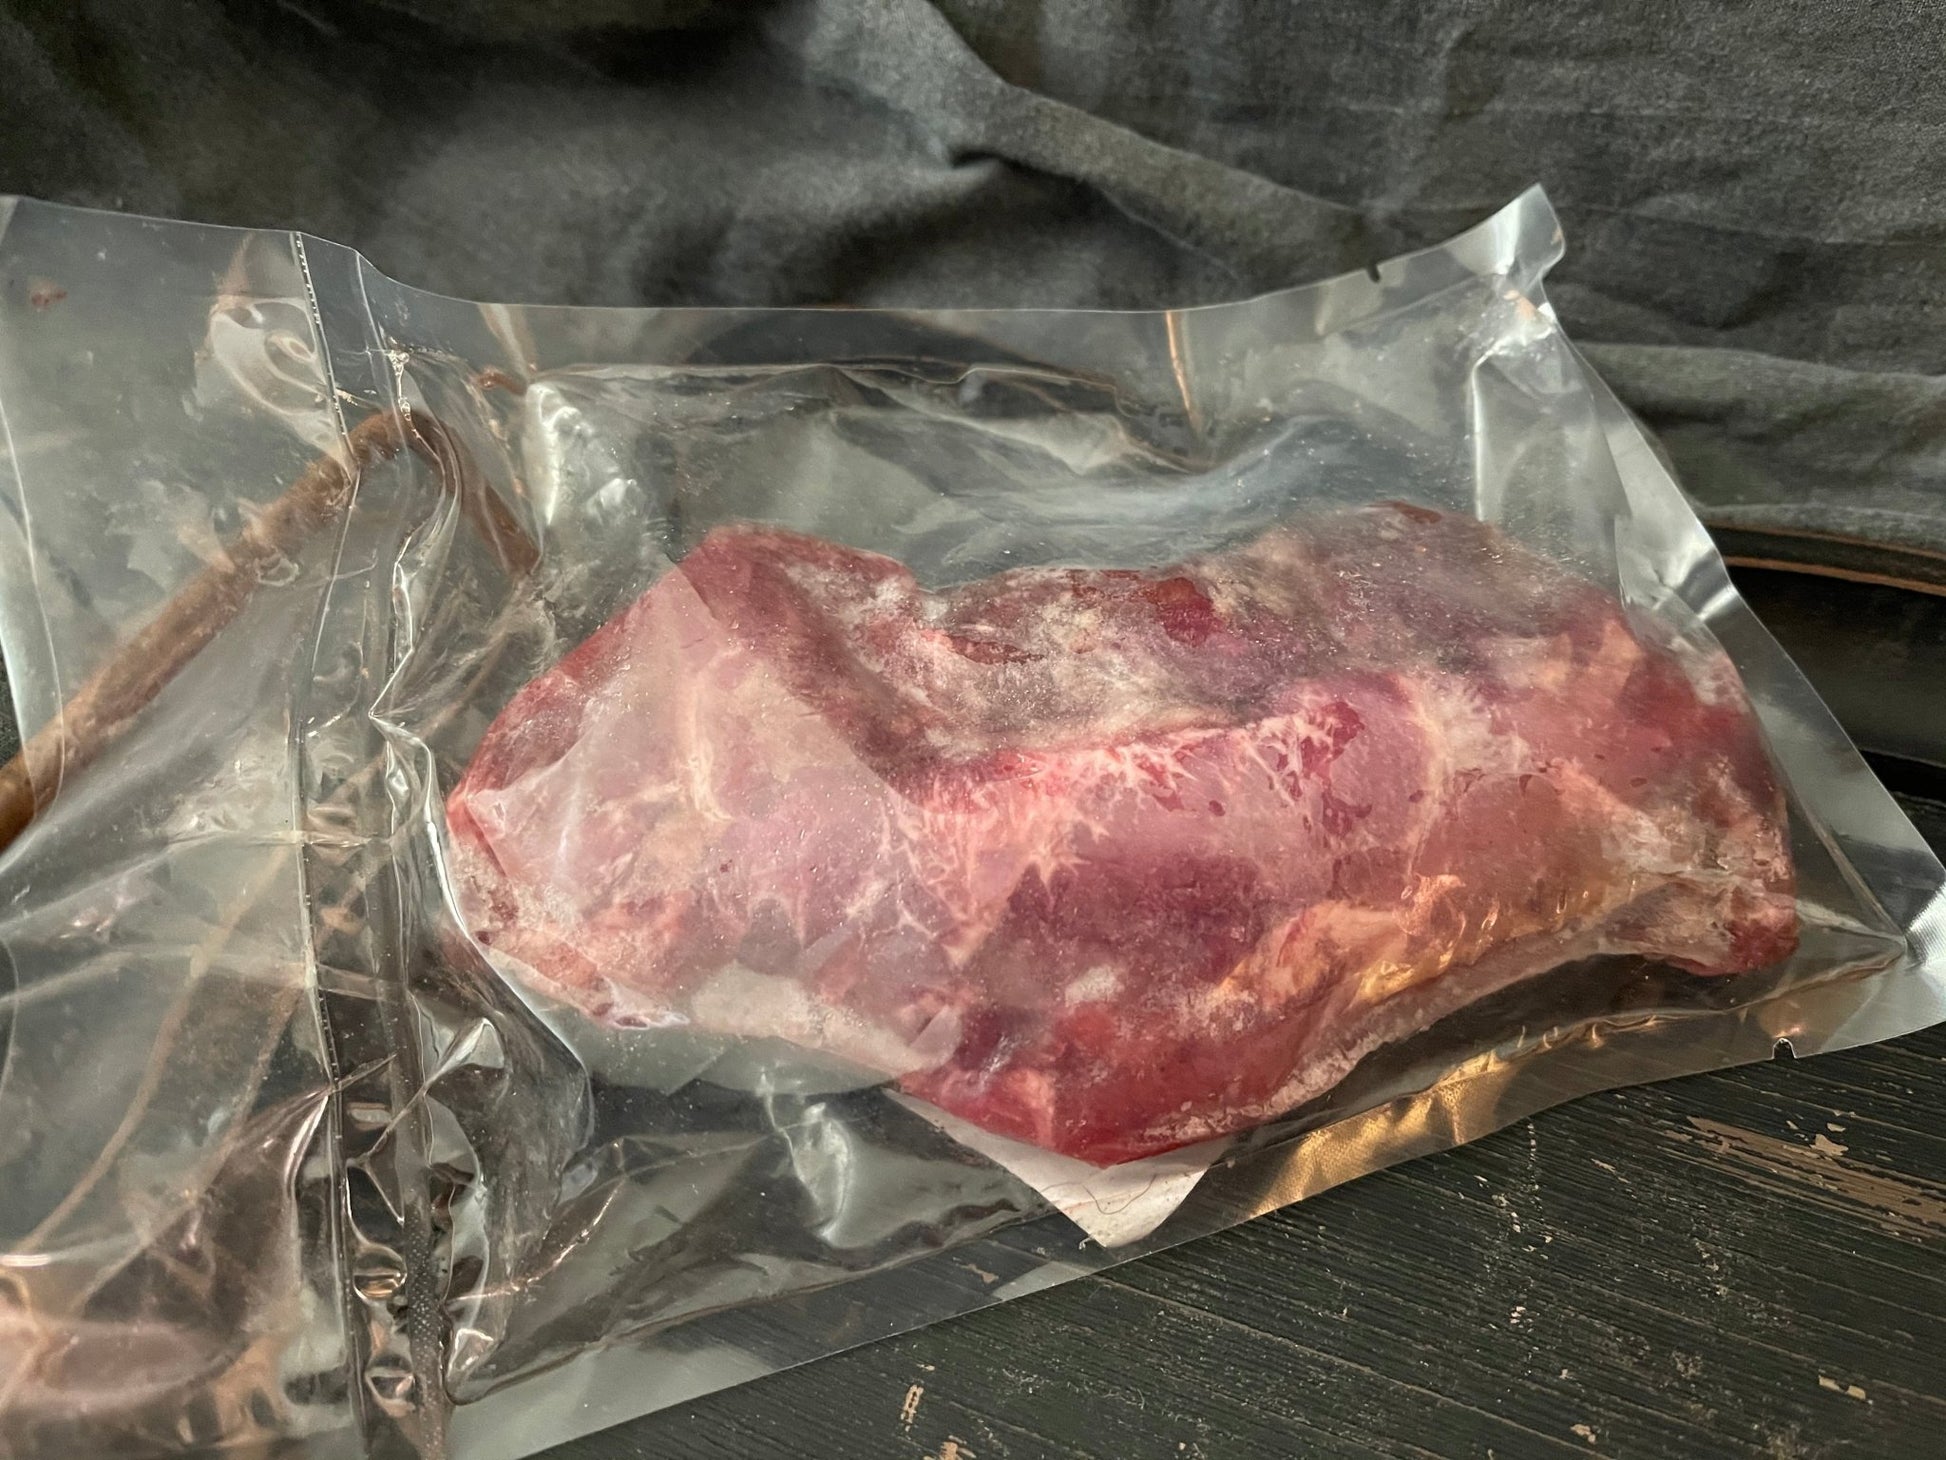 100% All-Natural Grass-Fed "Misfit" New York Strip - The Hufeisen-Ranch (WYO Wagyu)